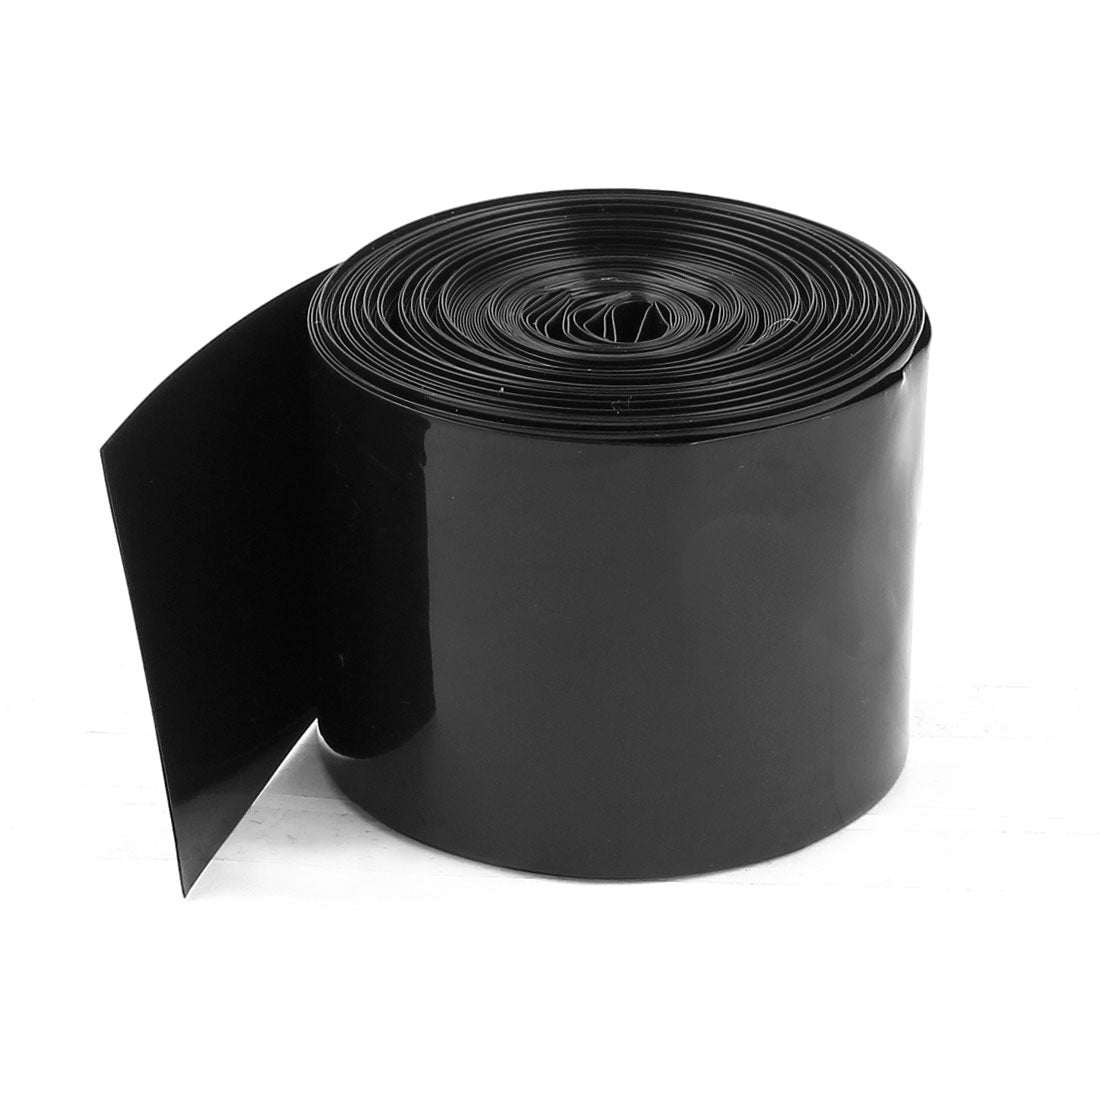 uxcell Uxcell 50mm/30mm PVC Heat Shrink Tubing Wrap Black 5m 16.4ft for 2 x 18650 Battery